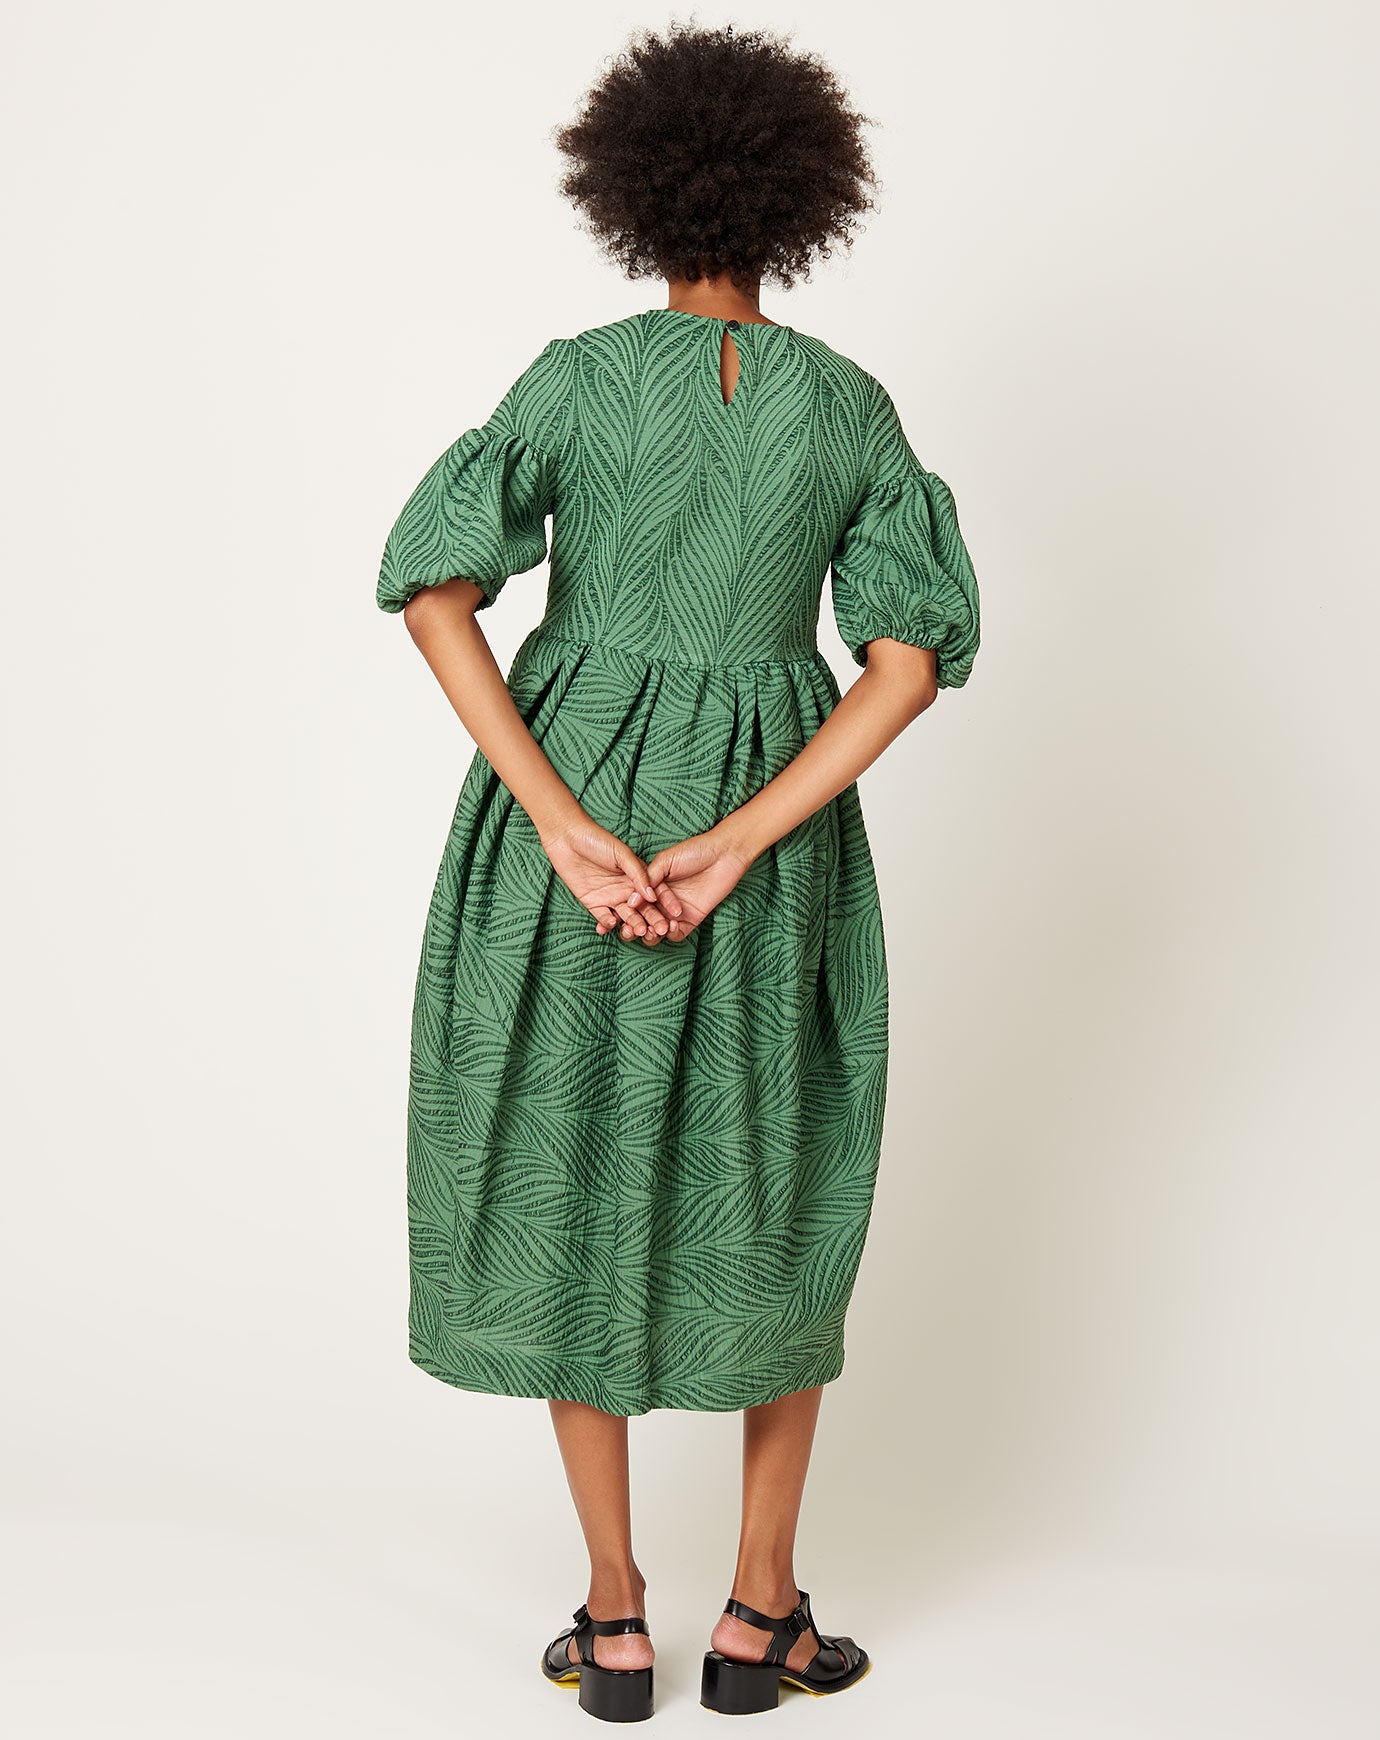 No. 6 Francis Dress in Emerald Bamboo